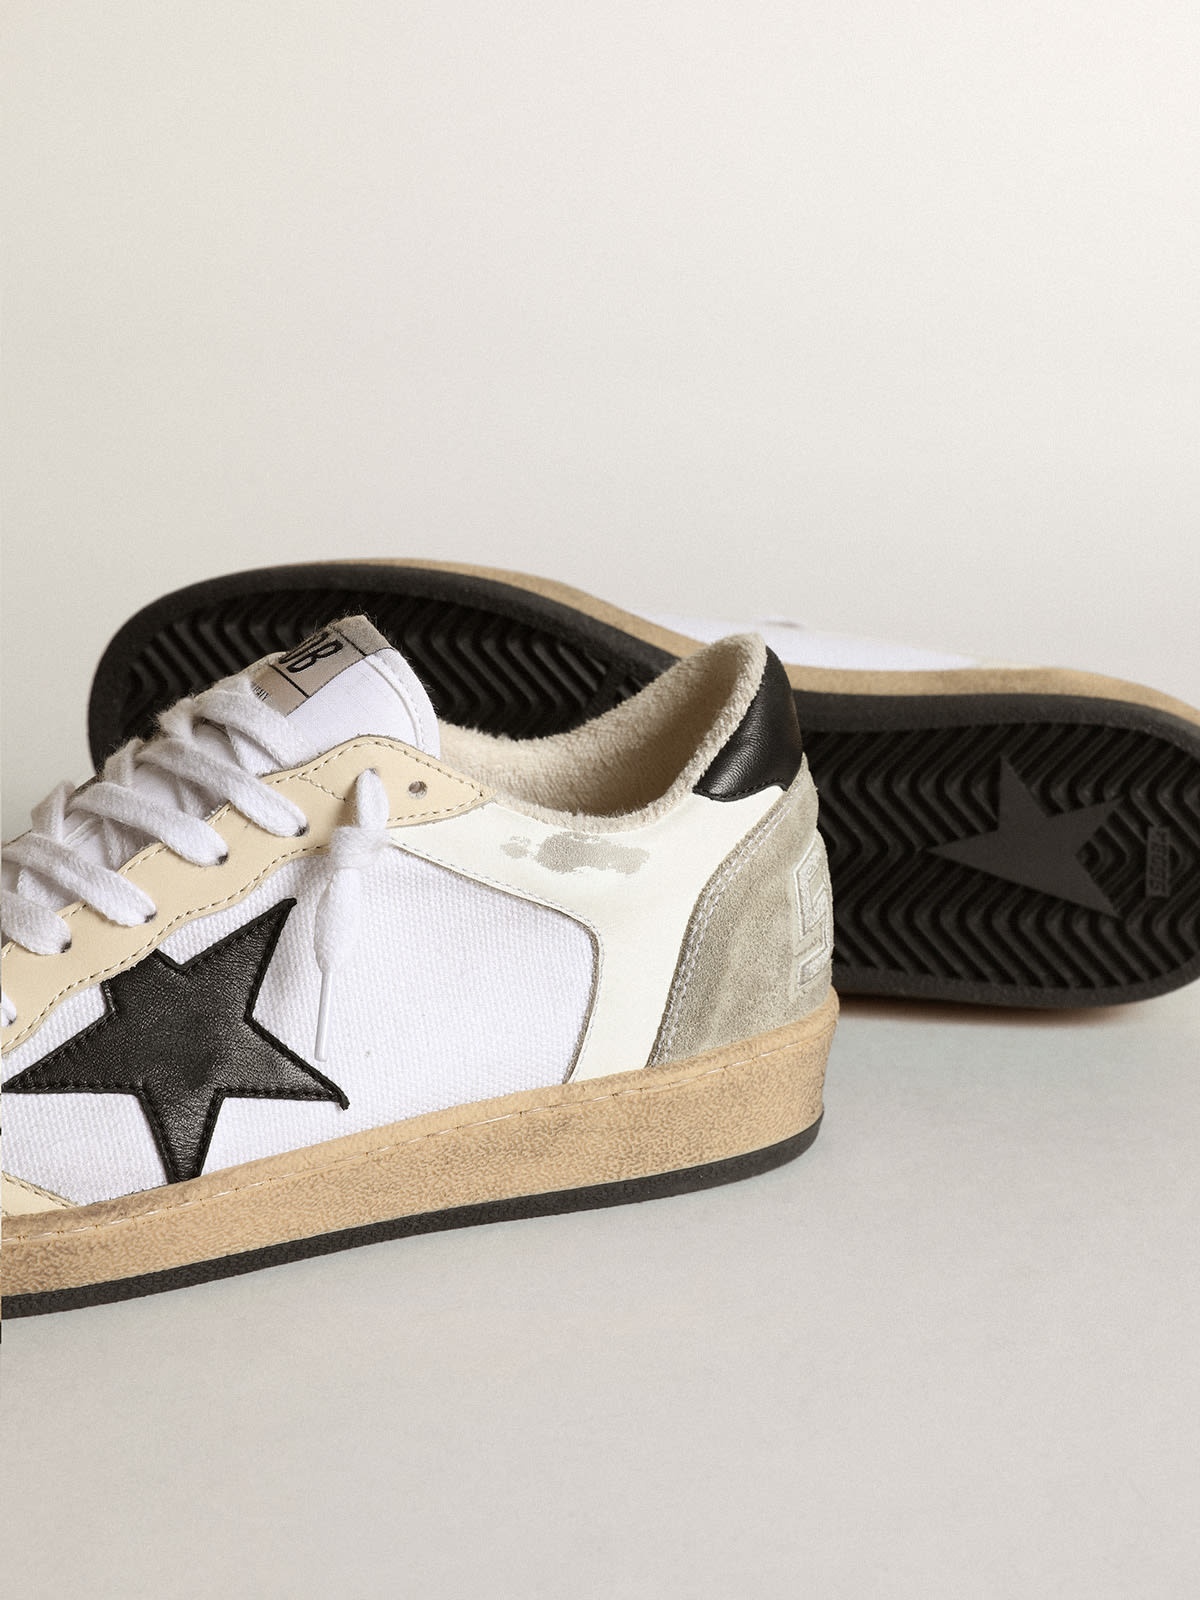 Women’s Ball Star sneakers in white canvas and leather with ivory leather inserts and black nappa le - 4